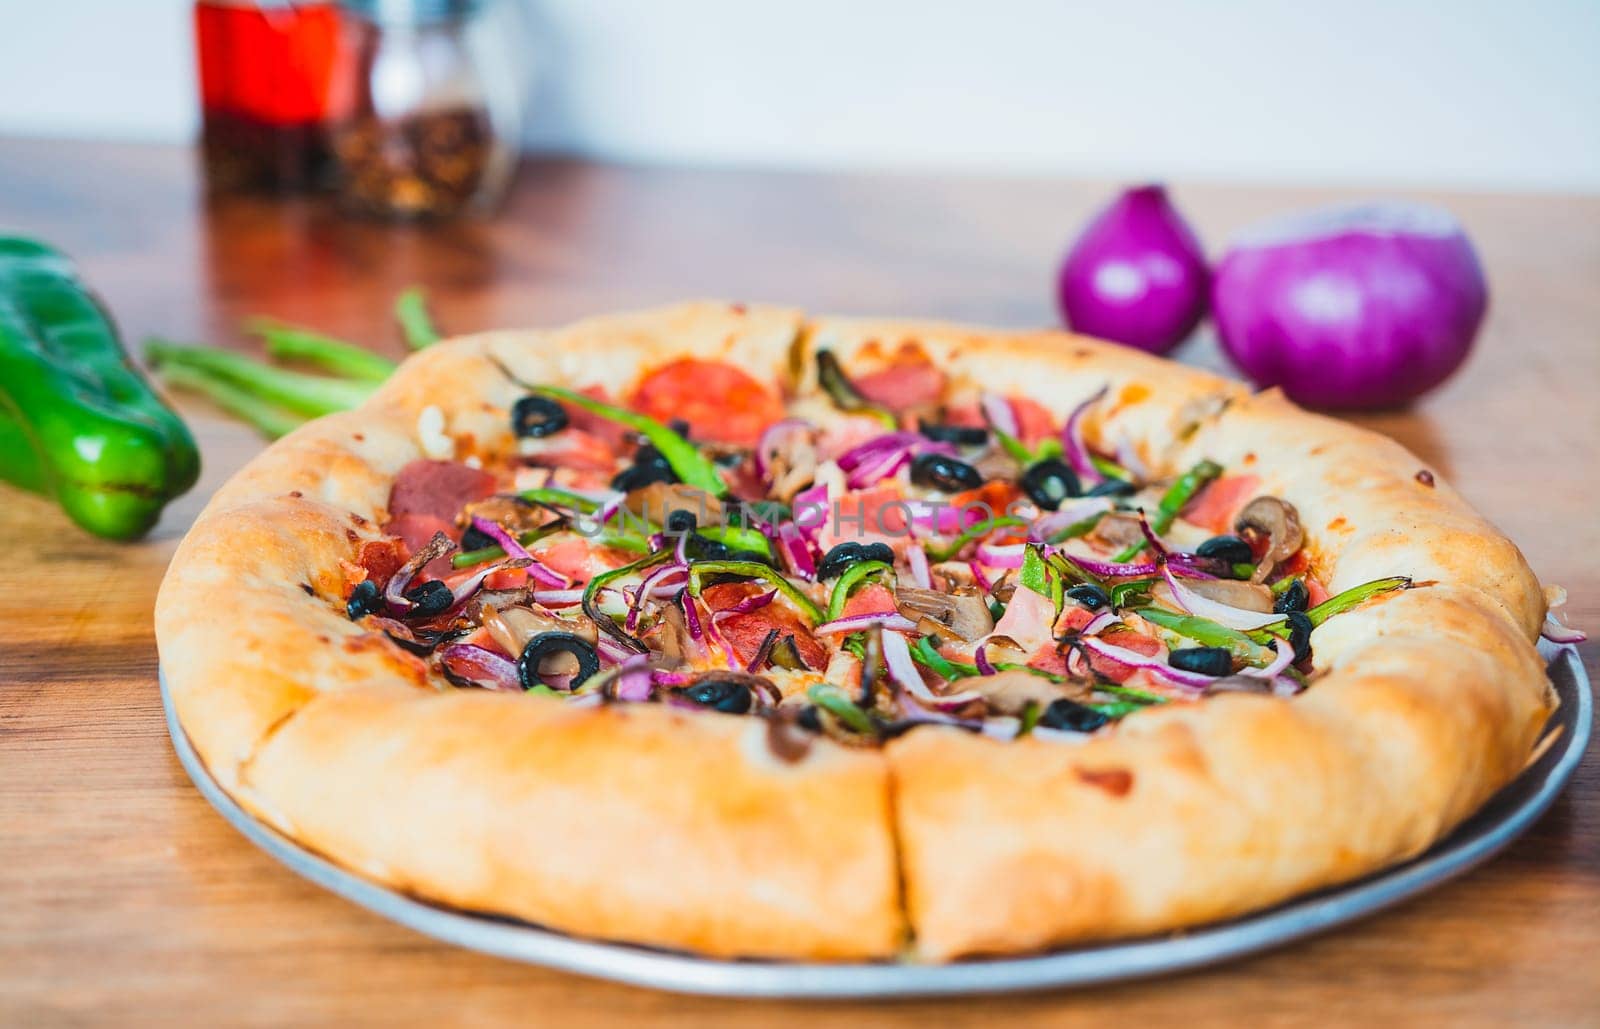 Close up of supreme pizza with olives and vegetables on wooden table. Delicious supreme pizza with vegetables served on table by isaiphoto